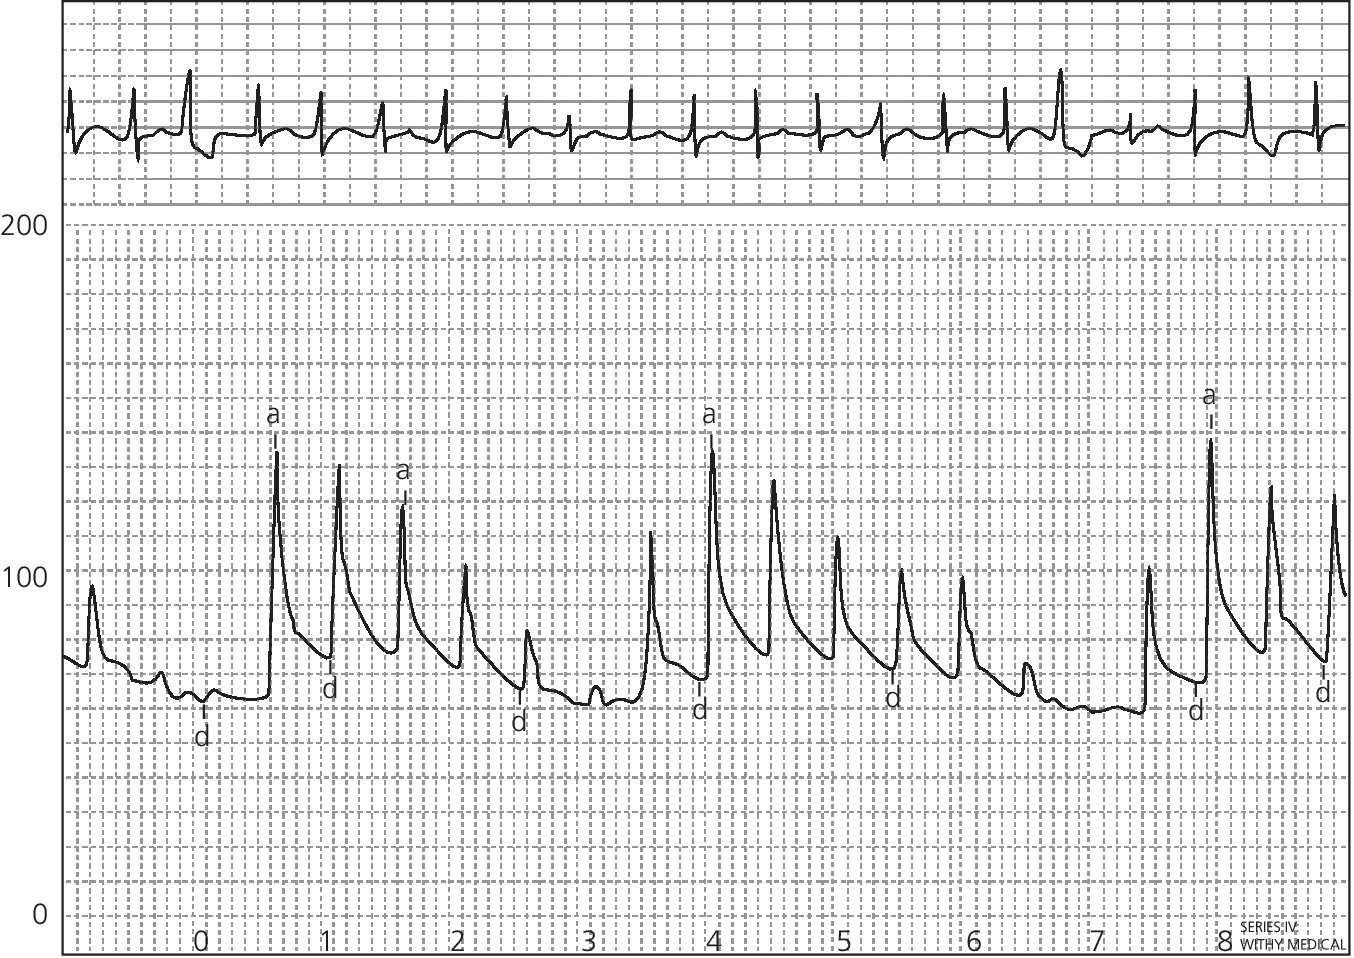 ECG illustrating the aortic pressure tracing in a patient with tamponade displaying pulsus paradoxus.